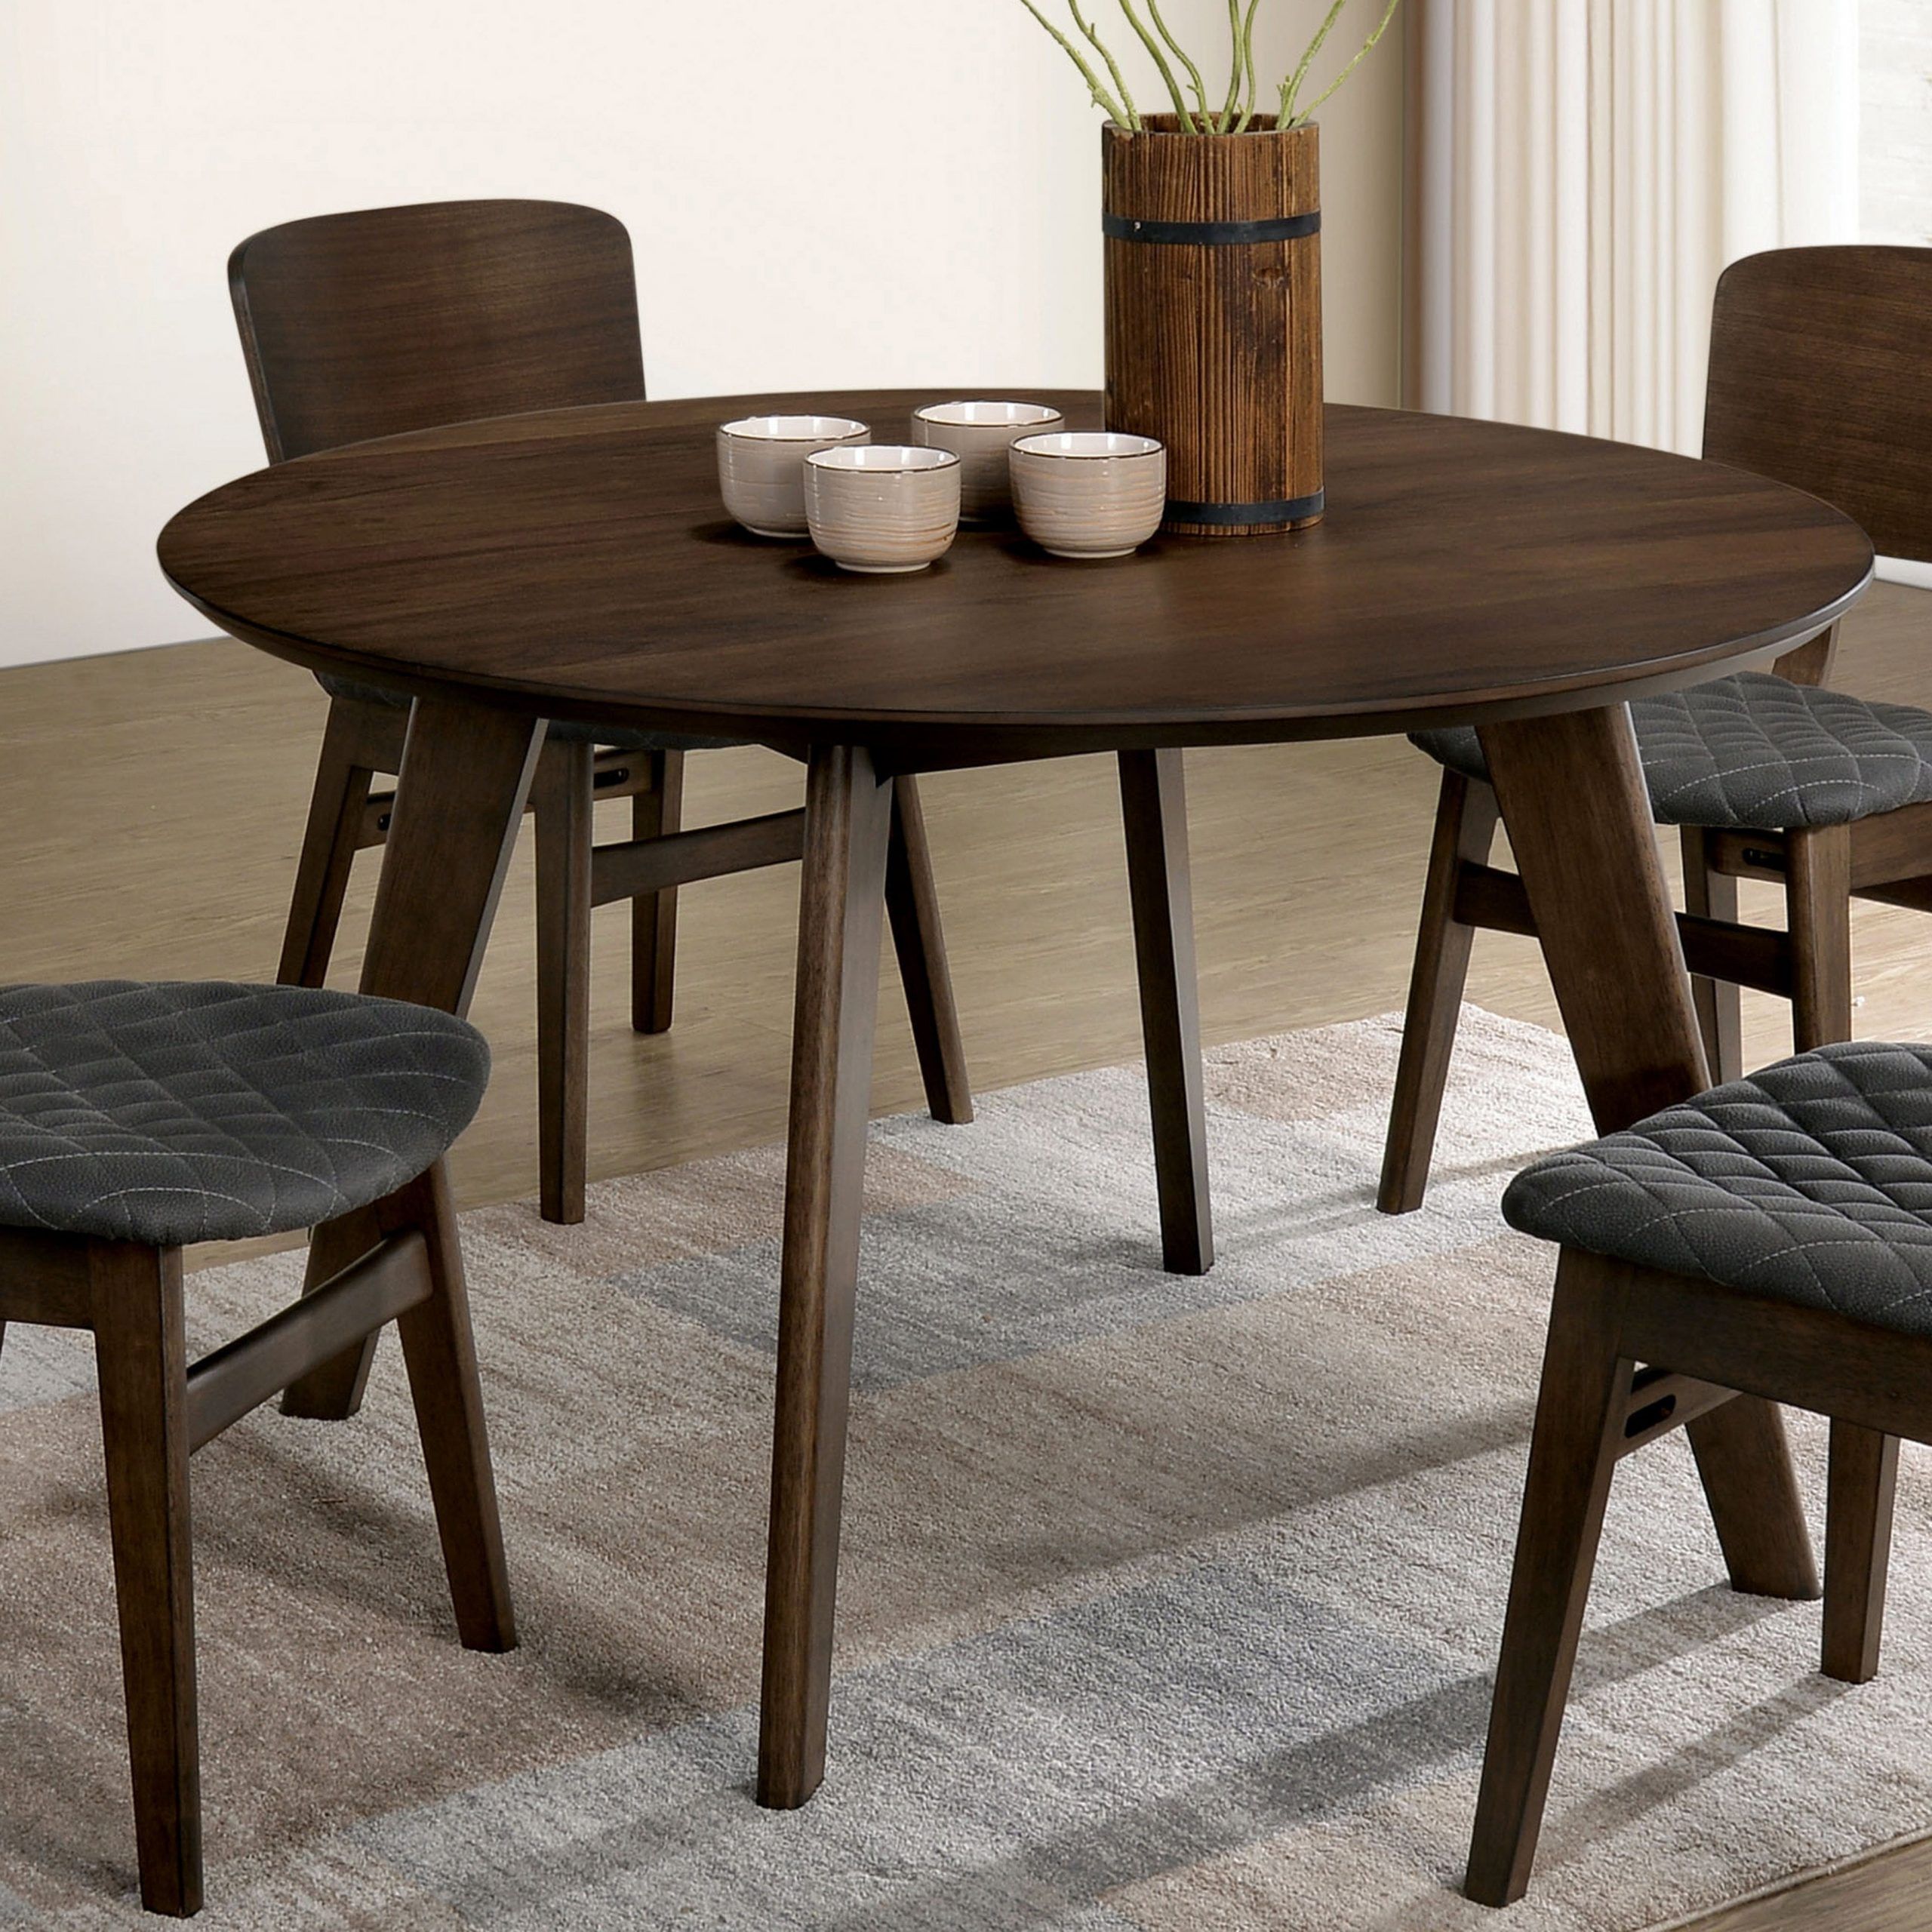 Trendy Carson Carrington Breisgau Mid Century Round Dining Table – Walnut In Round Dining Tables (View 8 of 30)